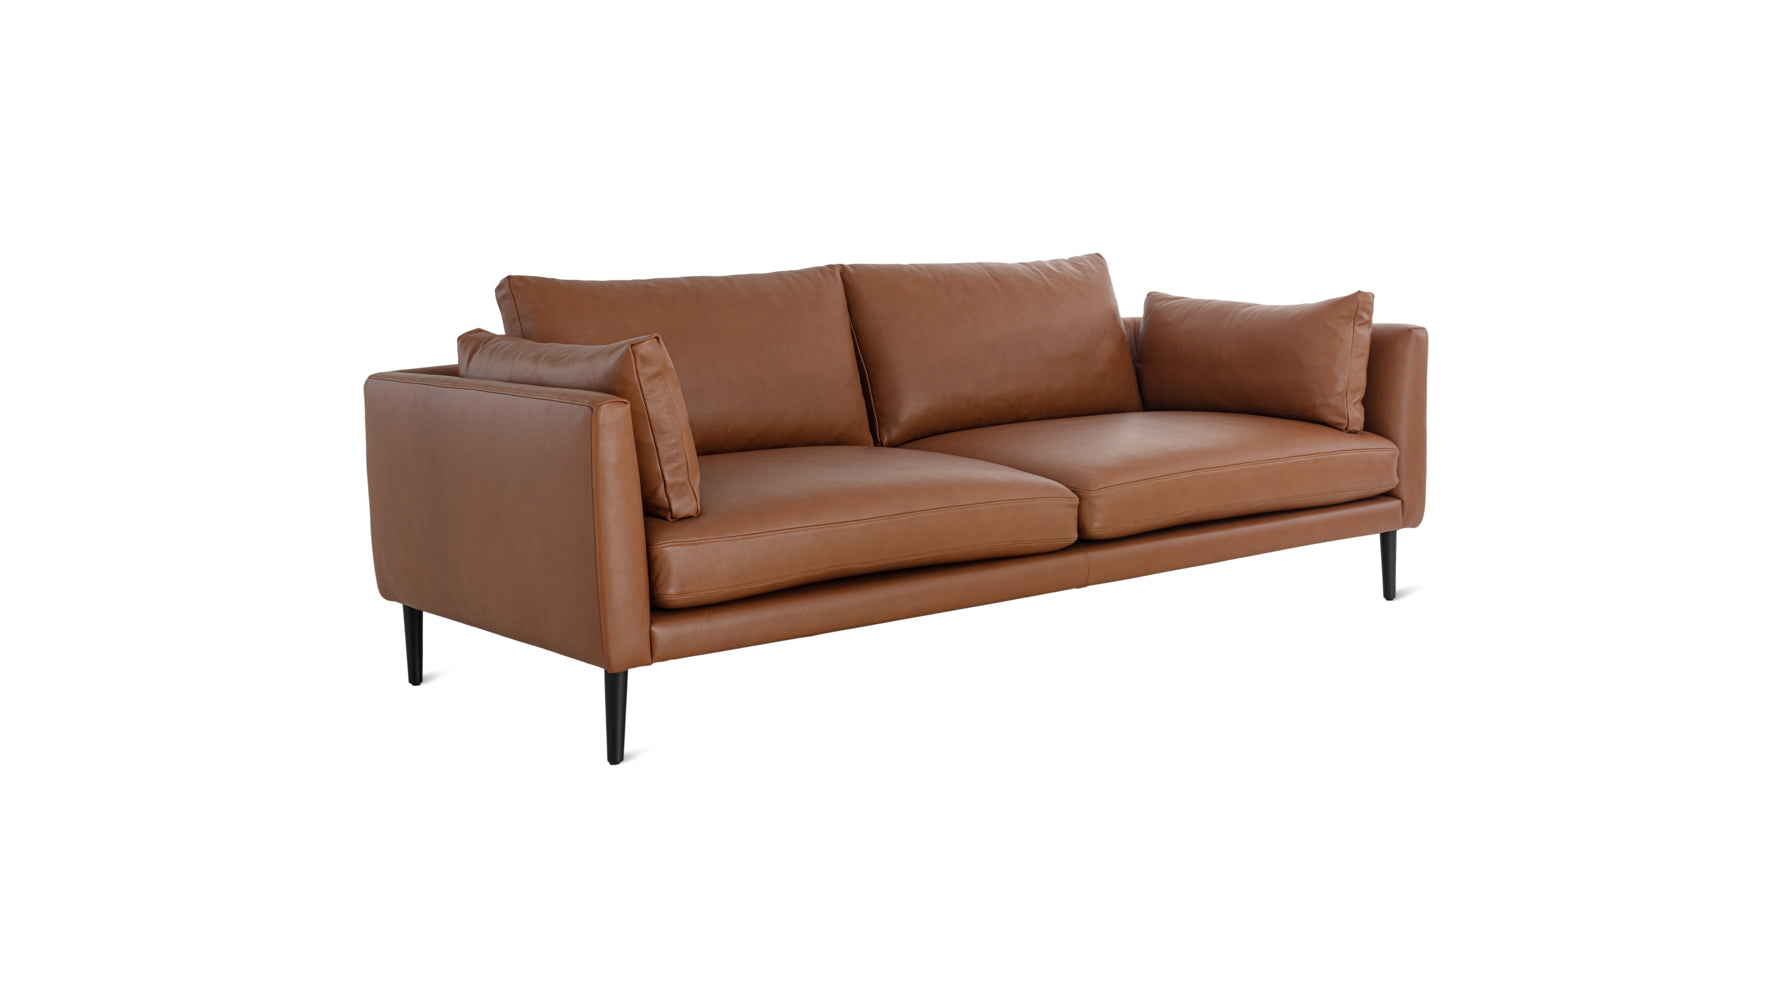 Stay A While Sofa, 2.5 Seater, Cigar - Image 2